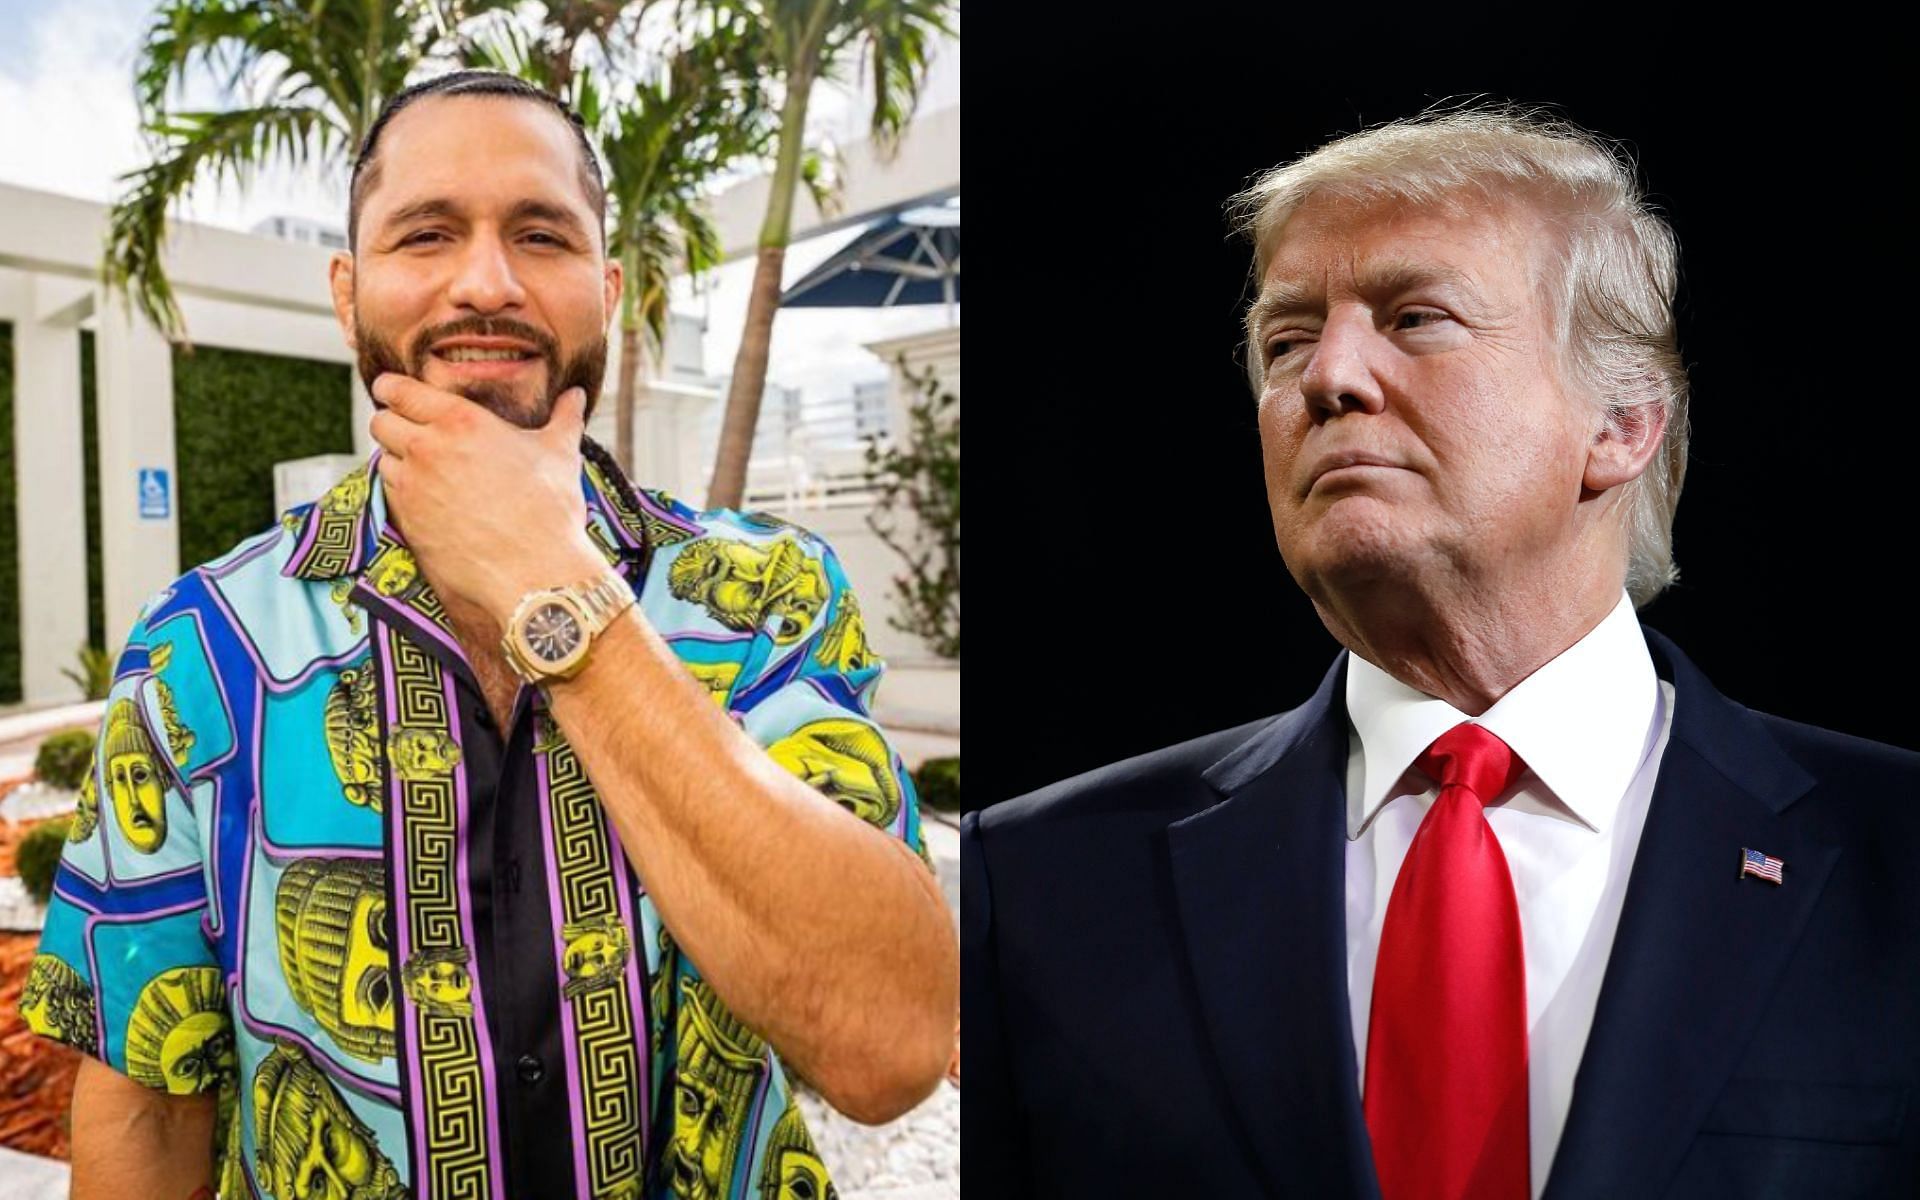 Jorge Masvidal (left) and DOnald Trump (right) [Image credits: Getty Images and @gamebredfighter on Instagram]